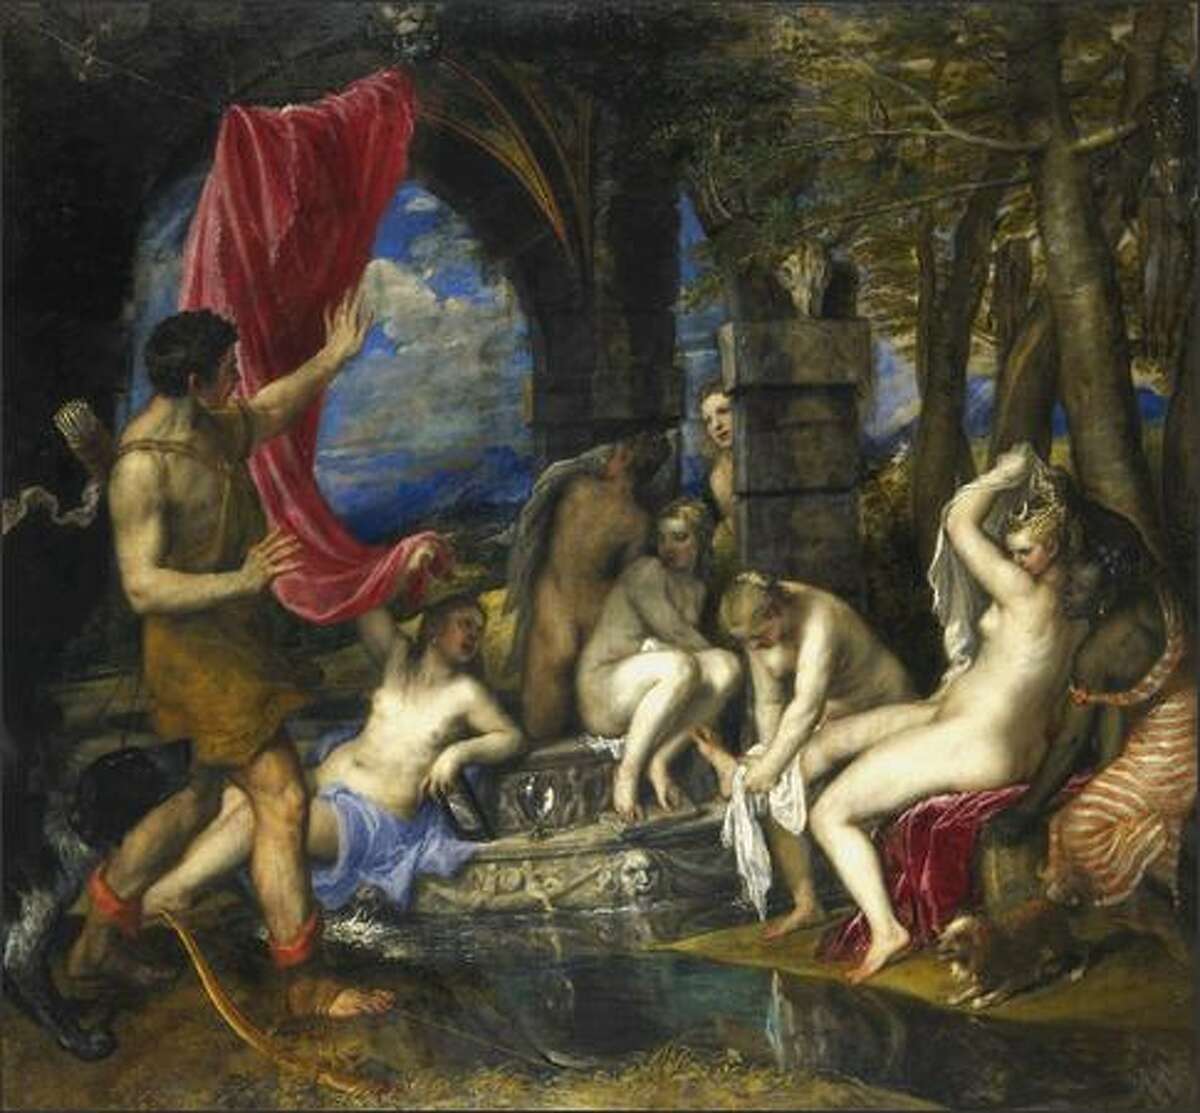 The Duke of Sutherland is offering Titian’s Renaissance masterpiece "Diana and Actaeon" to two British public galleries for $92 million – a steal considering it is worth $275 million on the open market.